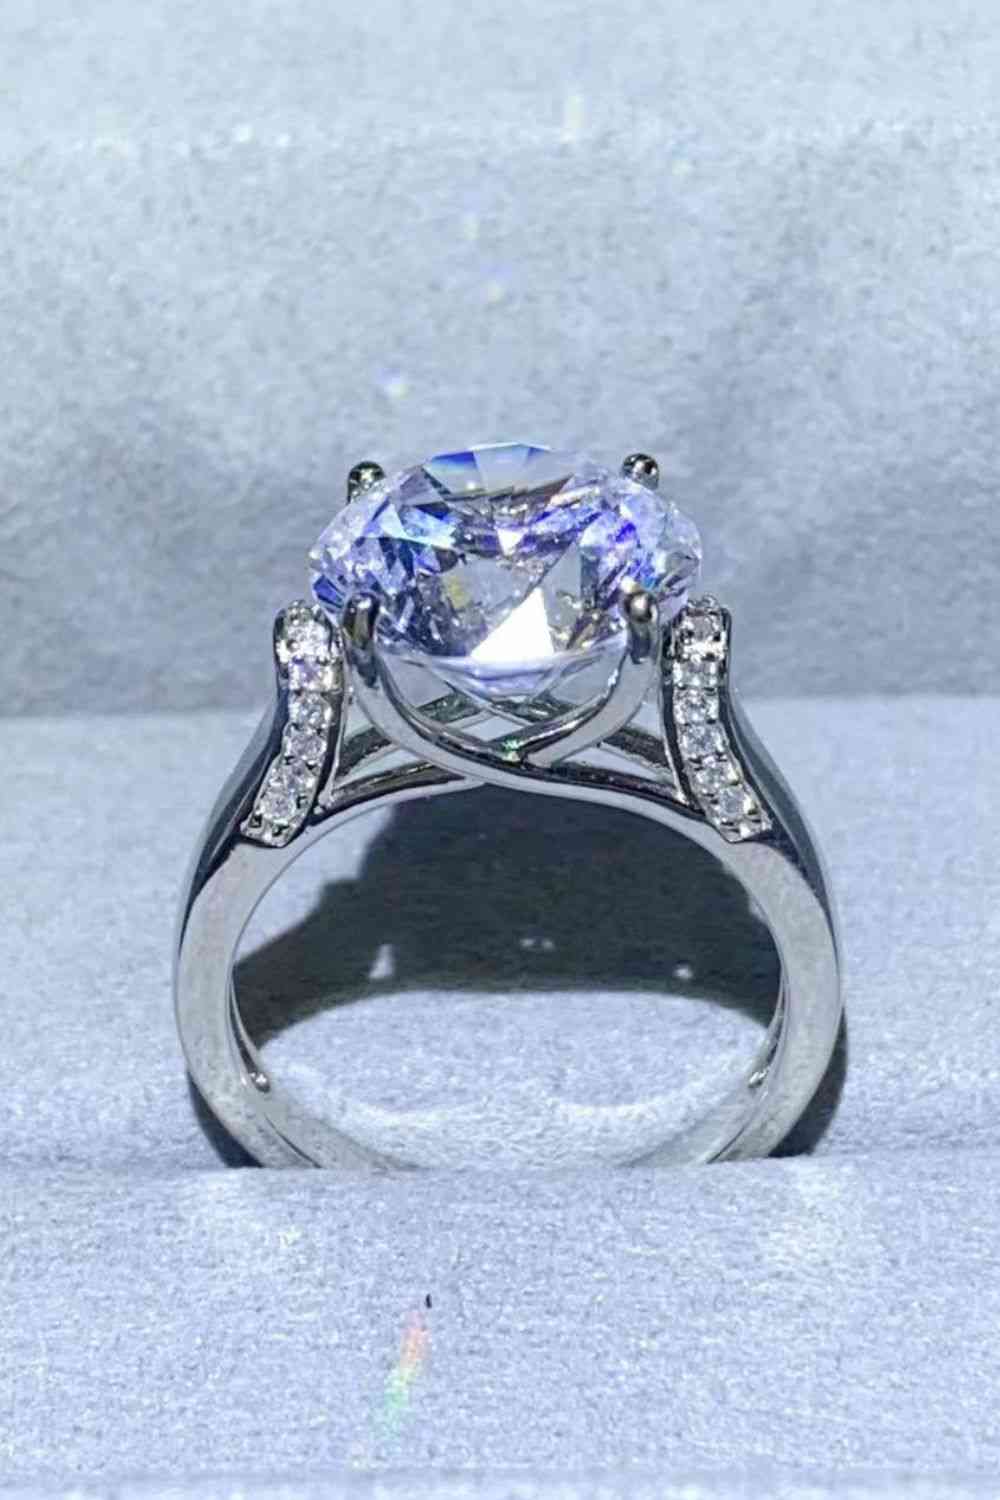 a diamond ring with a center stone surrounded by diamonds